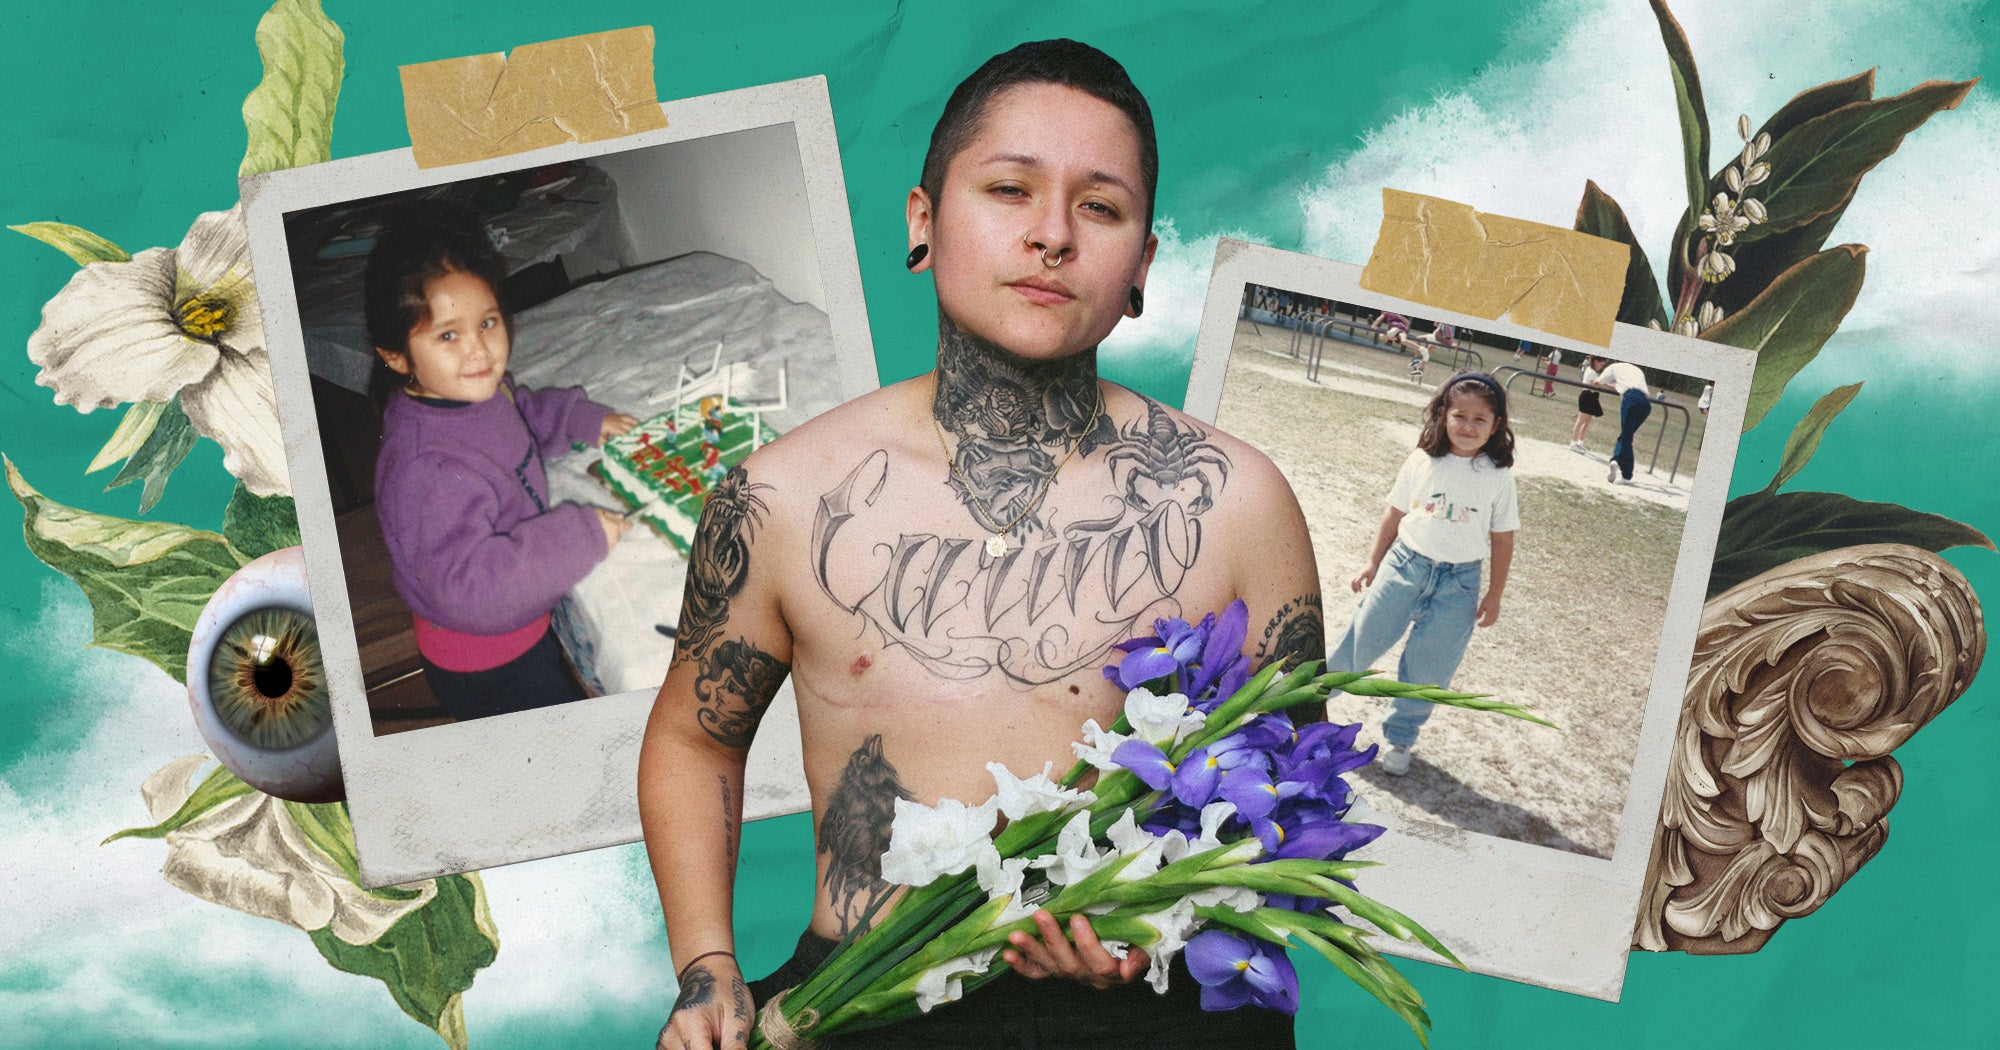 Navigating Transness in an Immigrant Home Has Brought Me Heartbreak & Hope